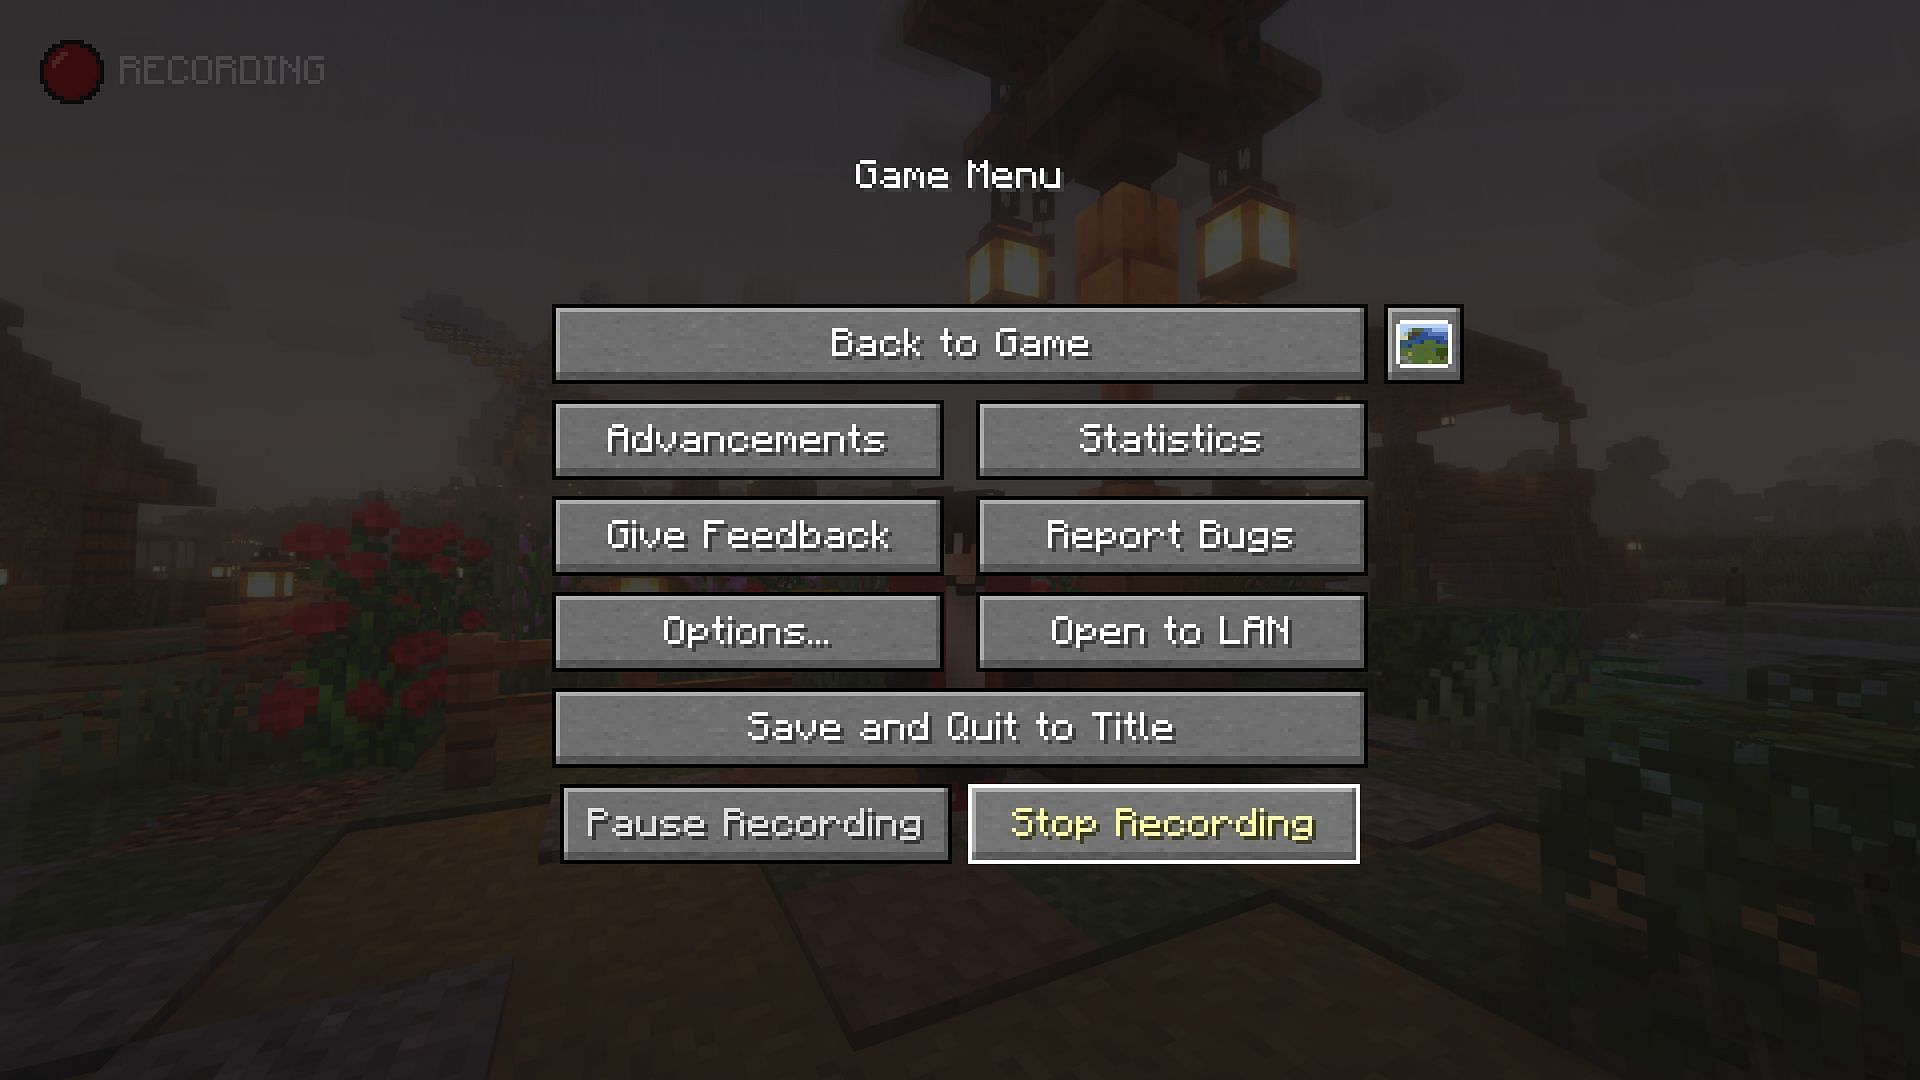 The gameplay is being recorded (Image via Mojang)